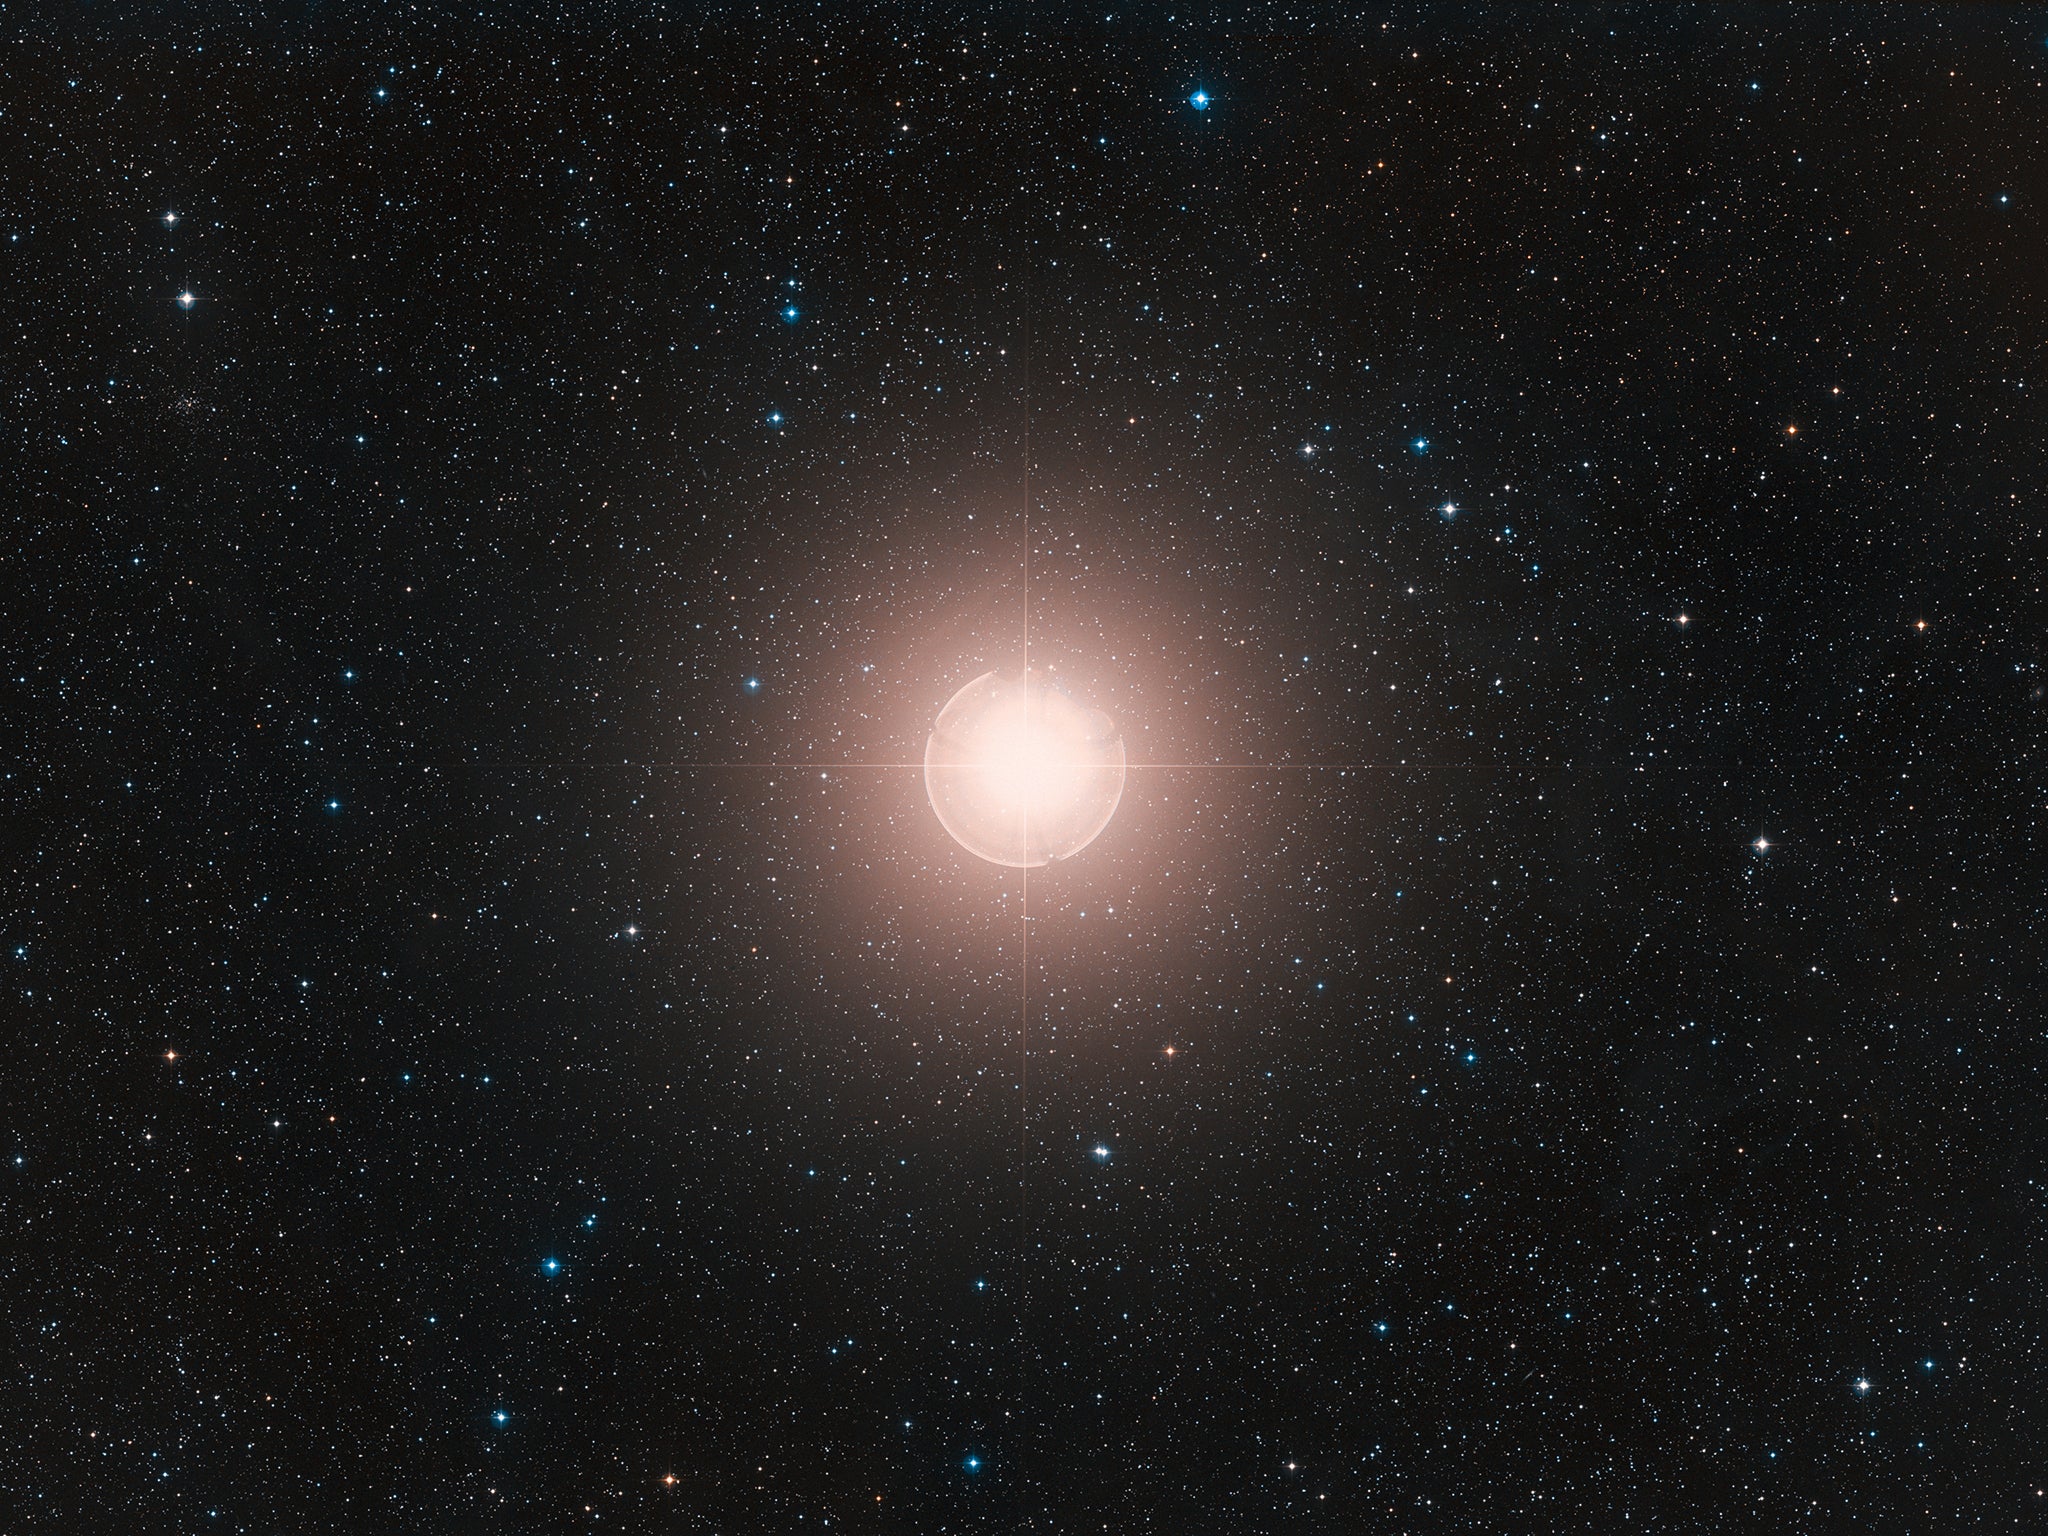 The reddish star has seen a sharp fade in its brightness recently, leading to speculation about its end